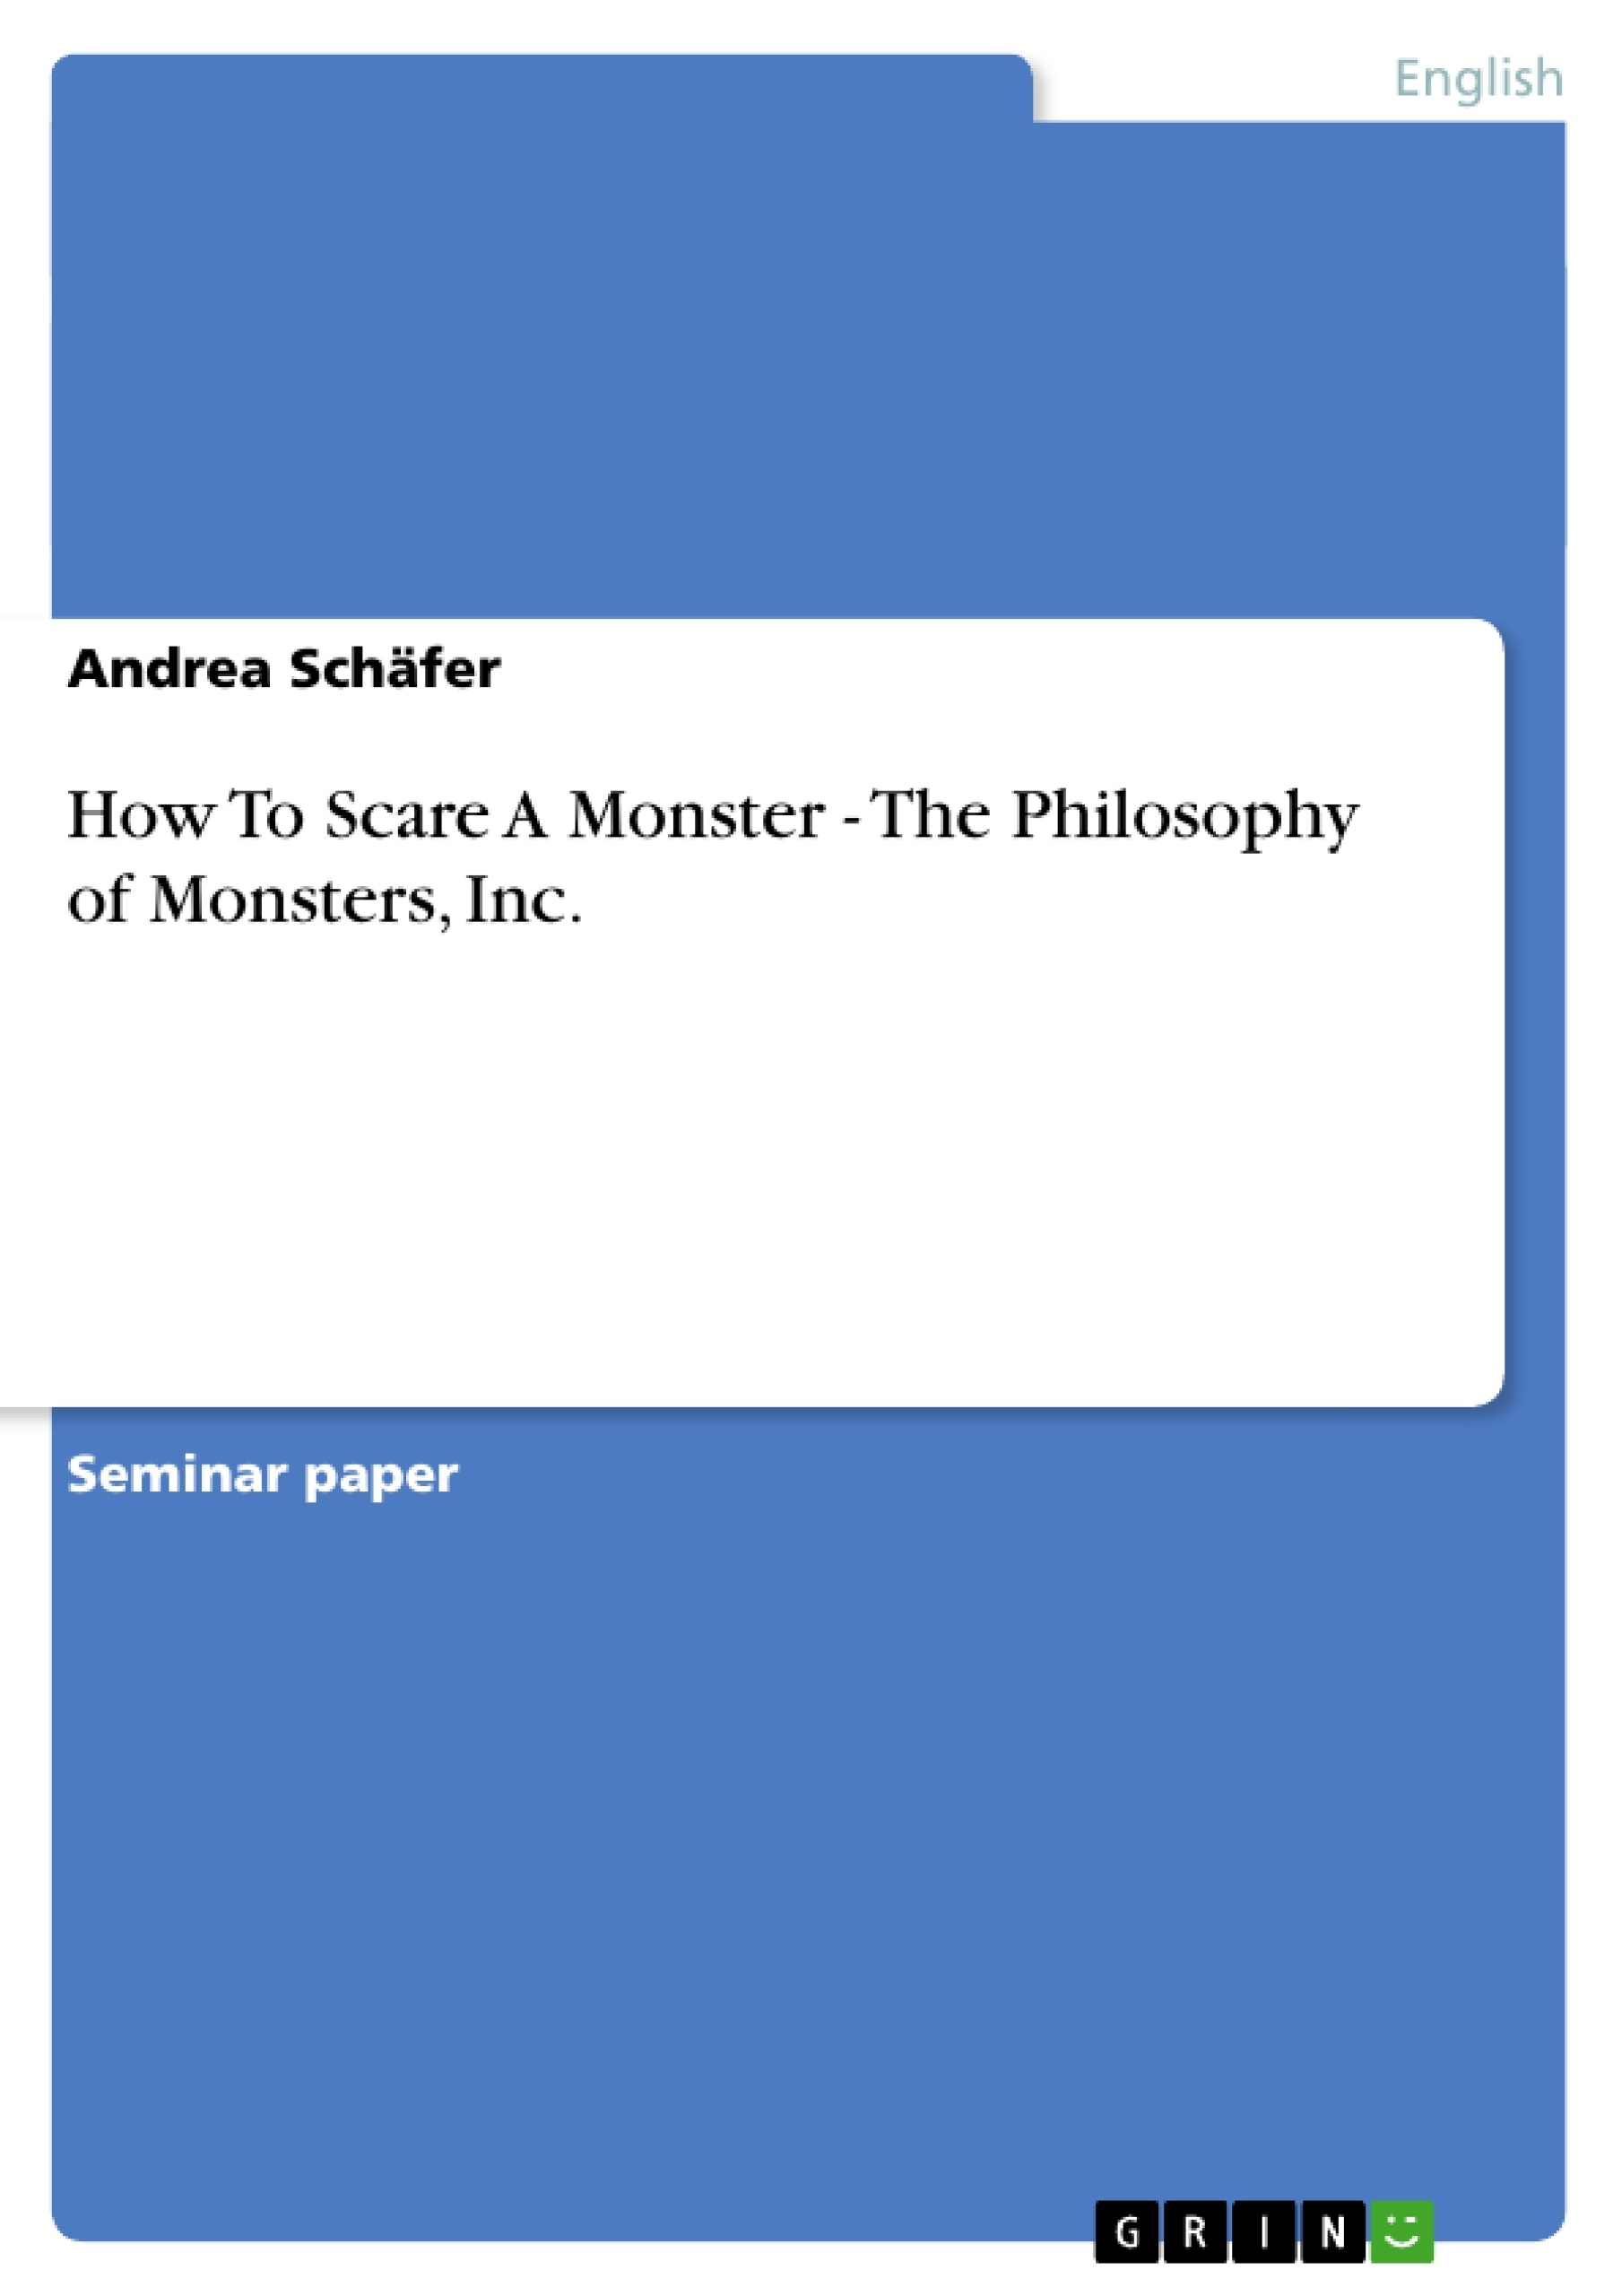 Title: How To Scare A Monster - The Philosophy of Monsters, Inc.